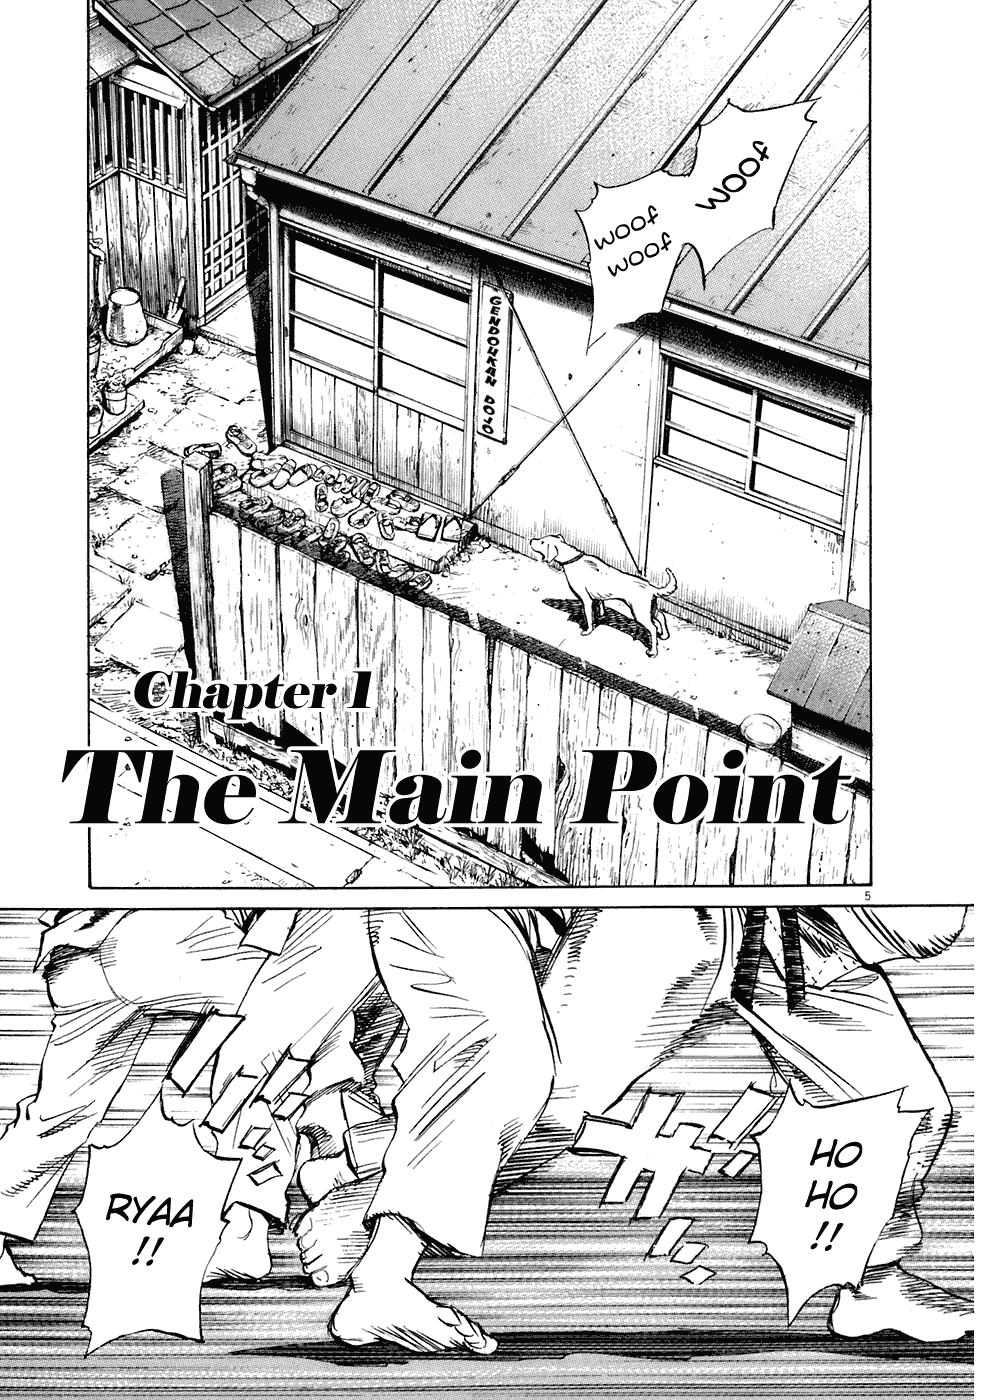 20th Century Boys Vol. 20 Ch. 215 The Important Point